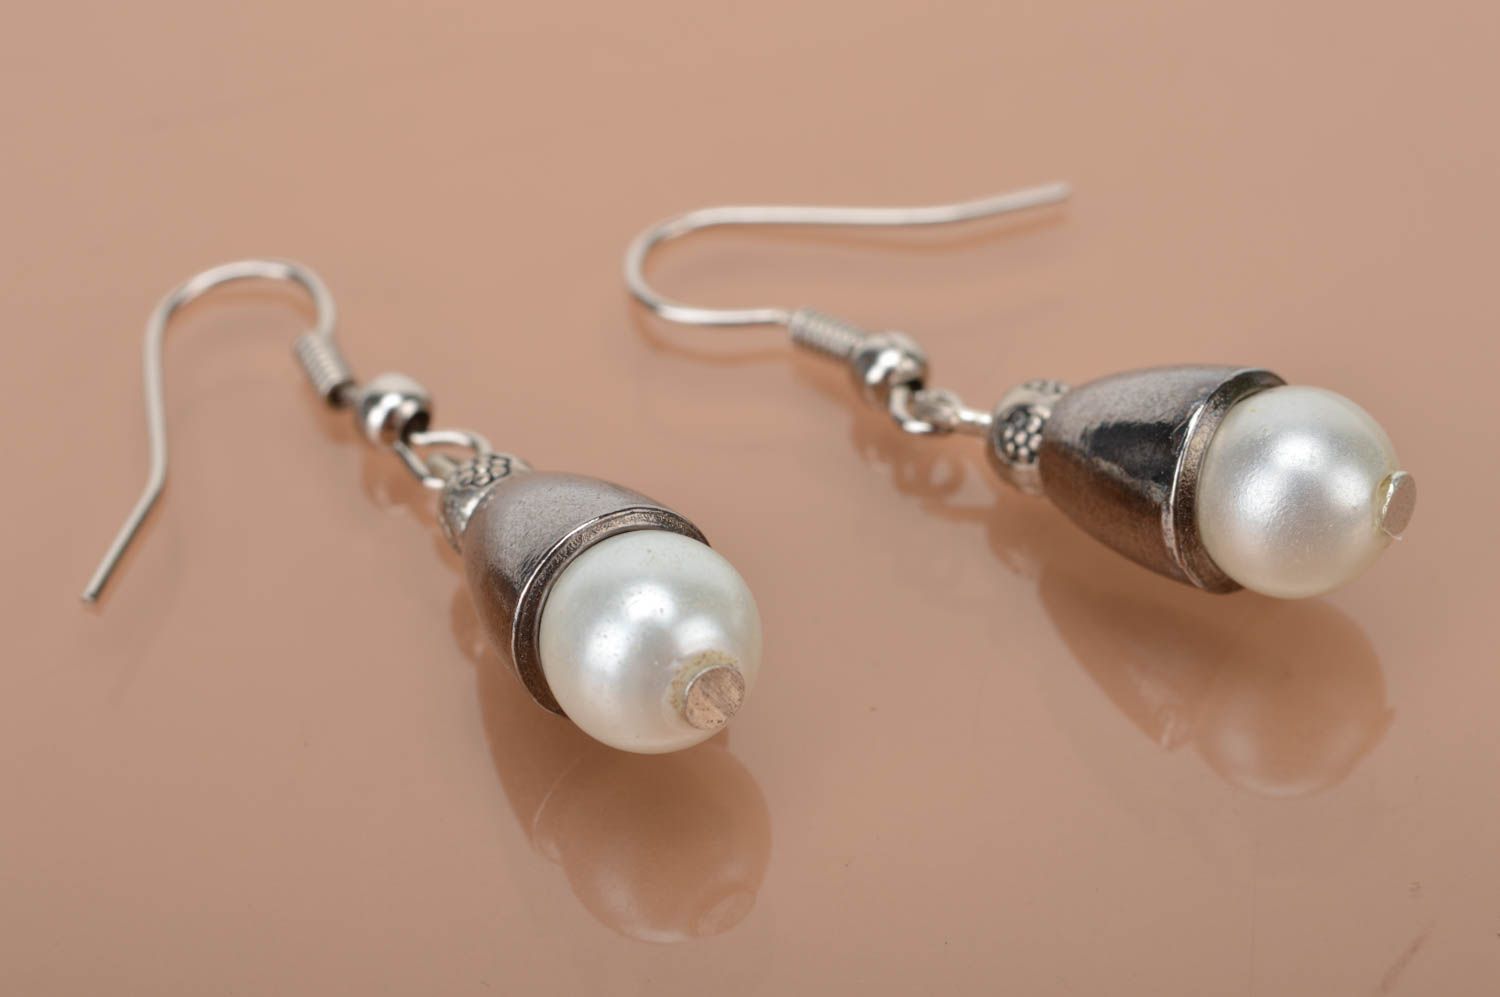 Handmade designer cute unusual earrings with charms and beads like pearls photo 2